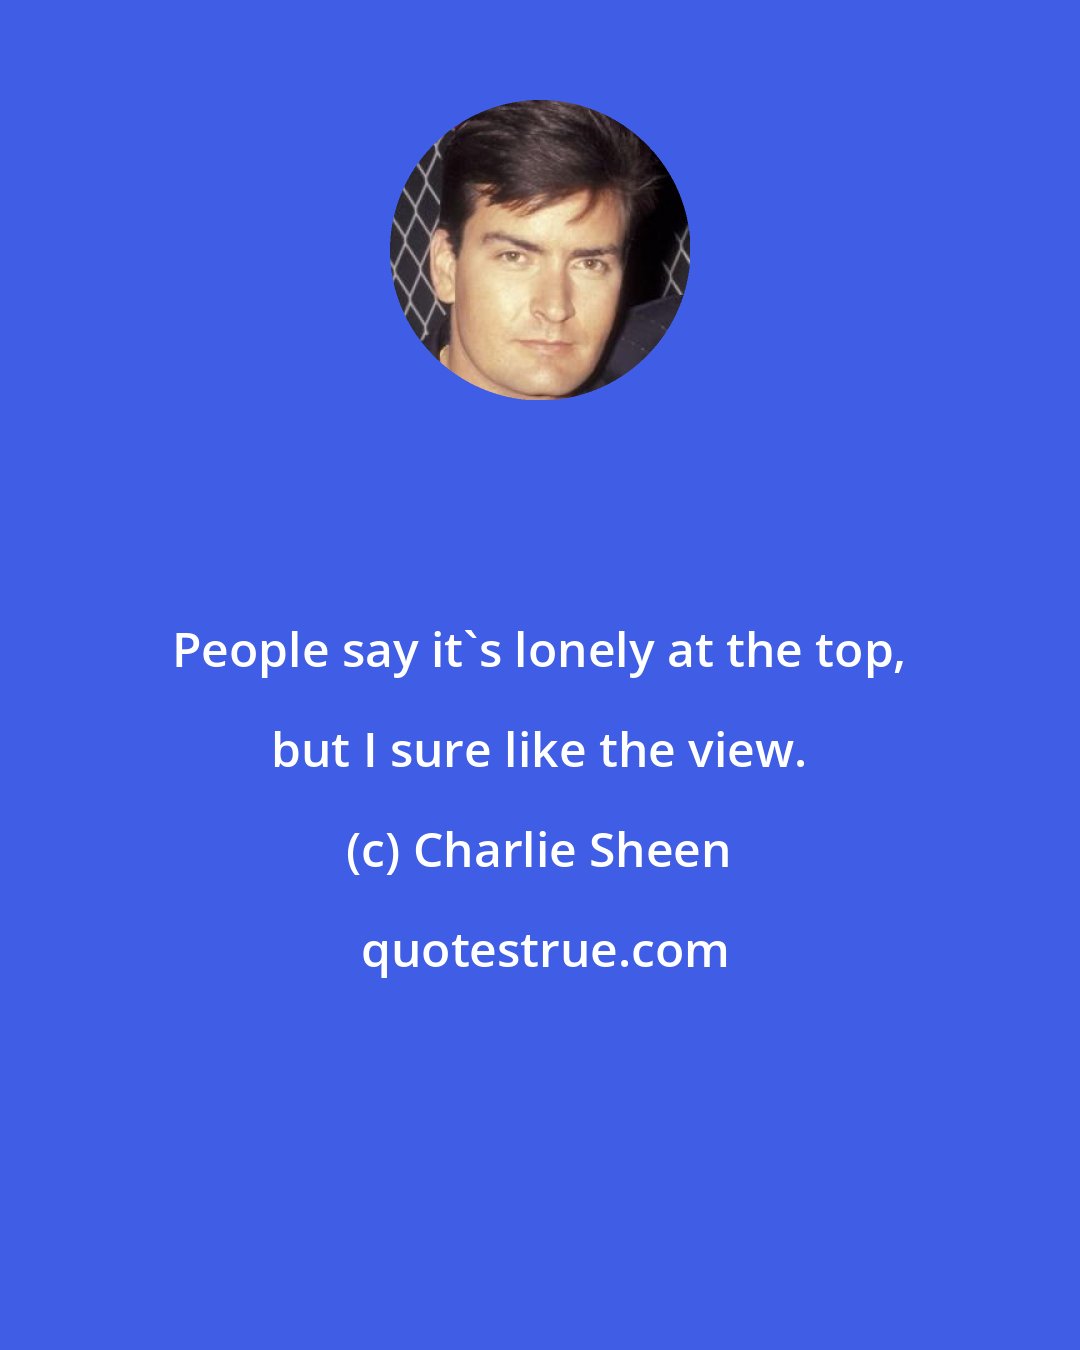 Charlie Sheen: People say it's lonely at the top, but I sure like the view.